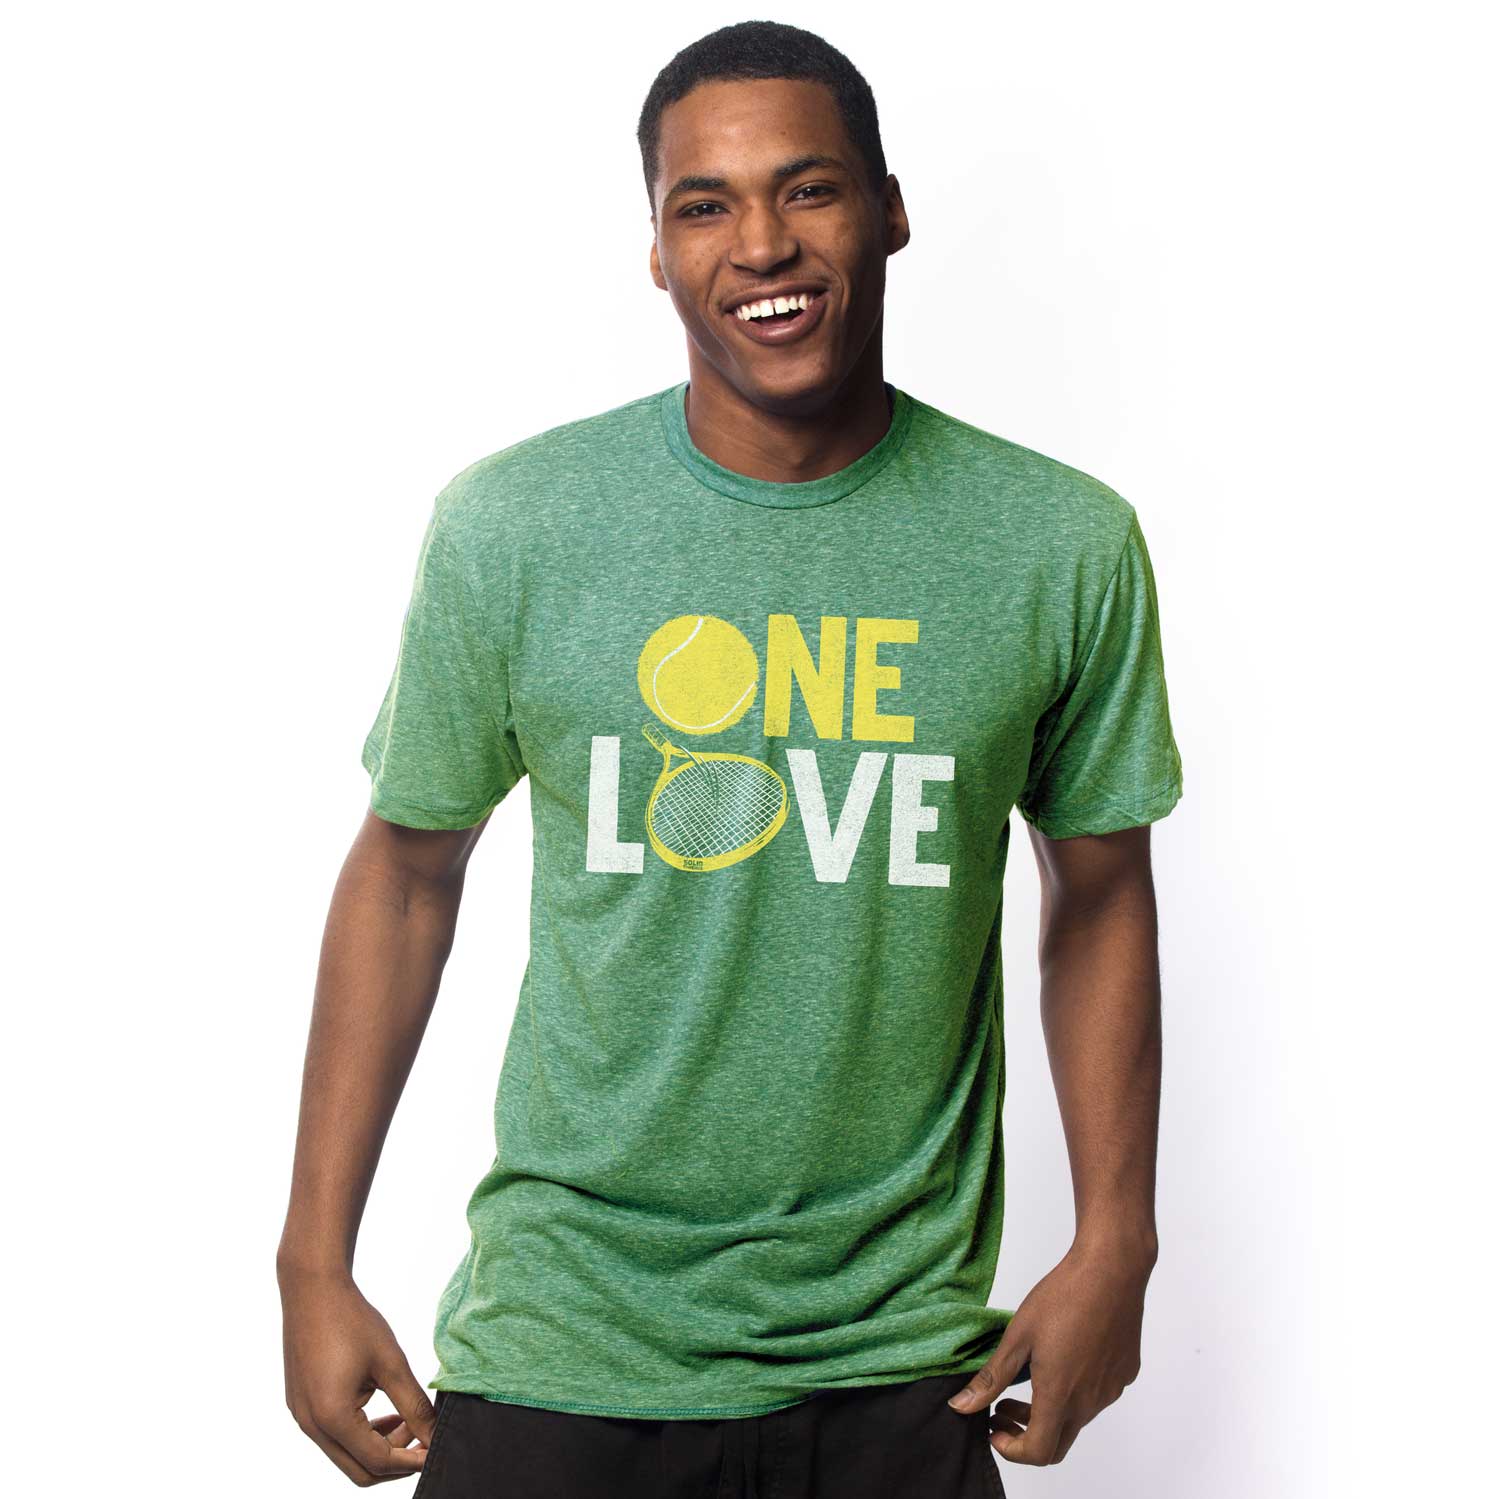 Men's One Love Cool Graphic T-Shirt | Vintage Tennis Racket Tee on Model | Solid Threads